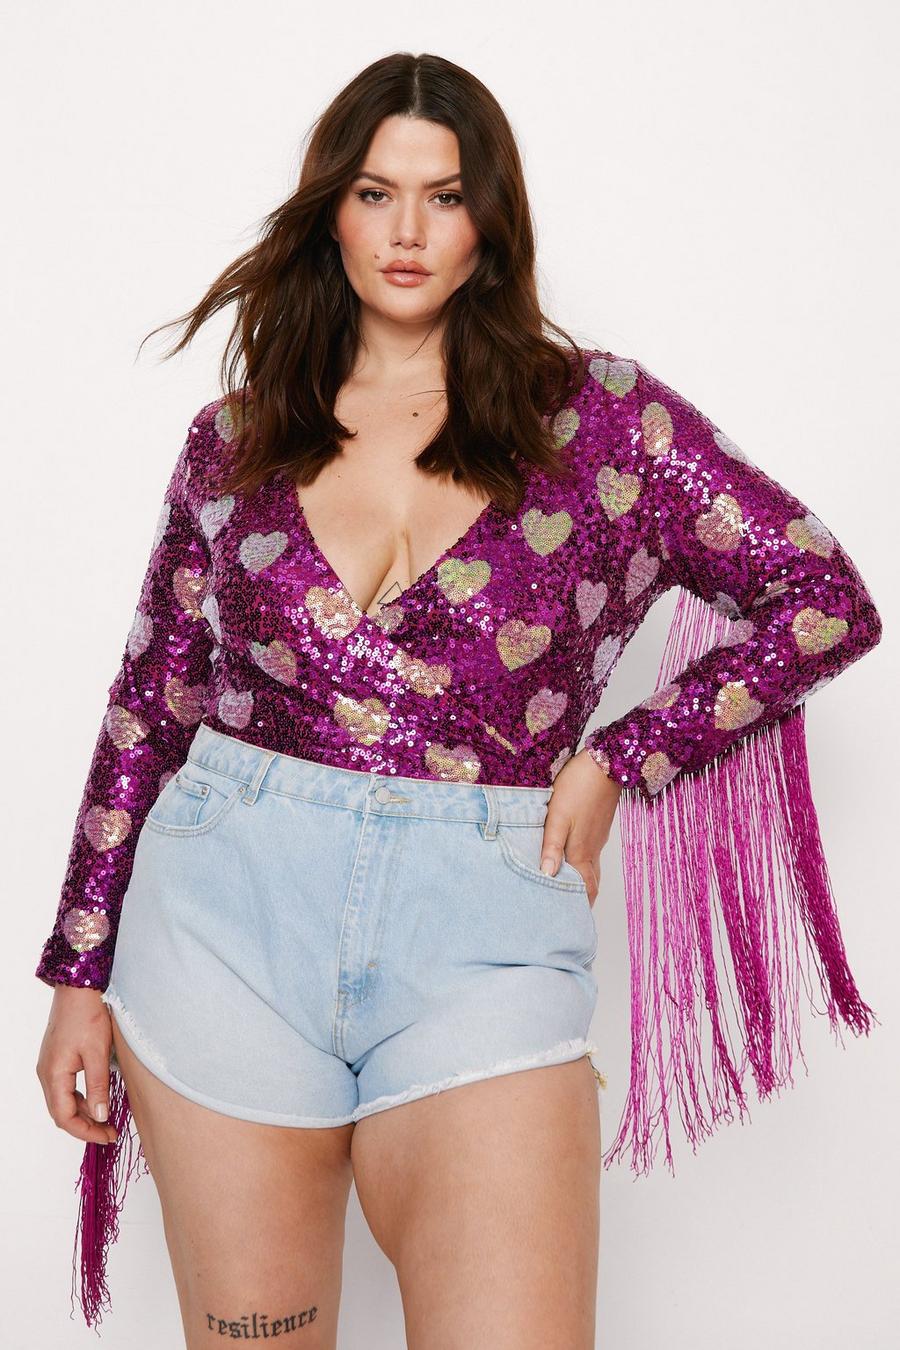 Plus Size Tops, Plus Size Going Out & Crop Tops